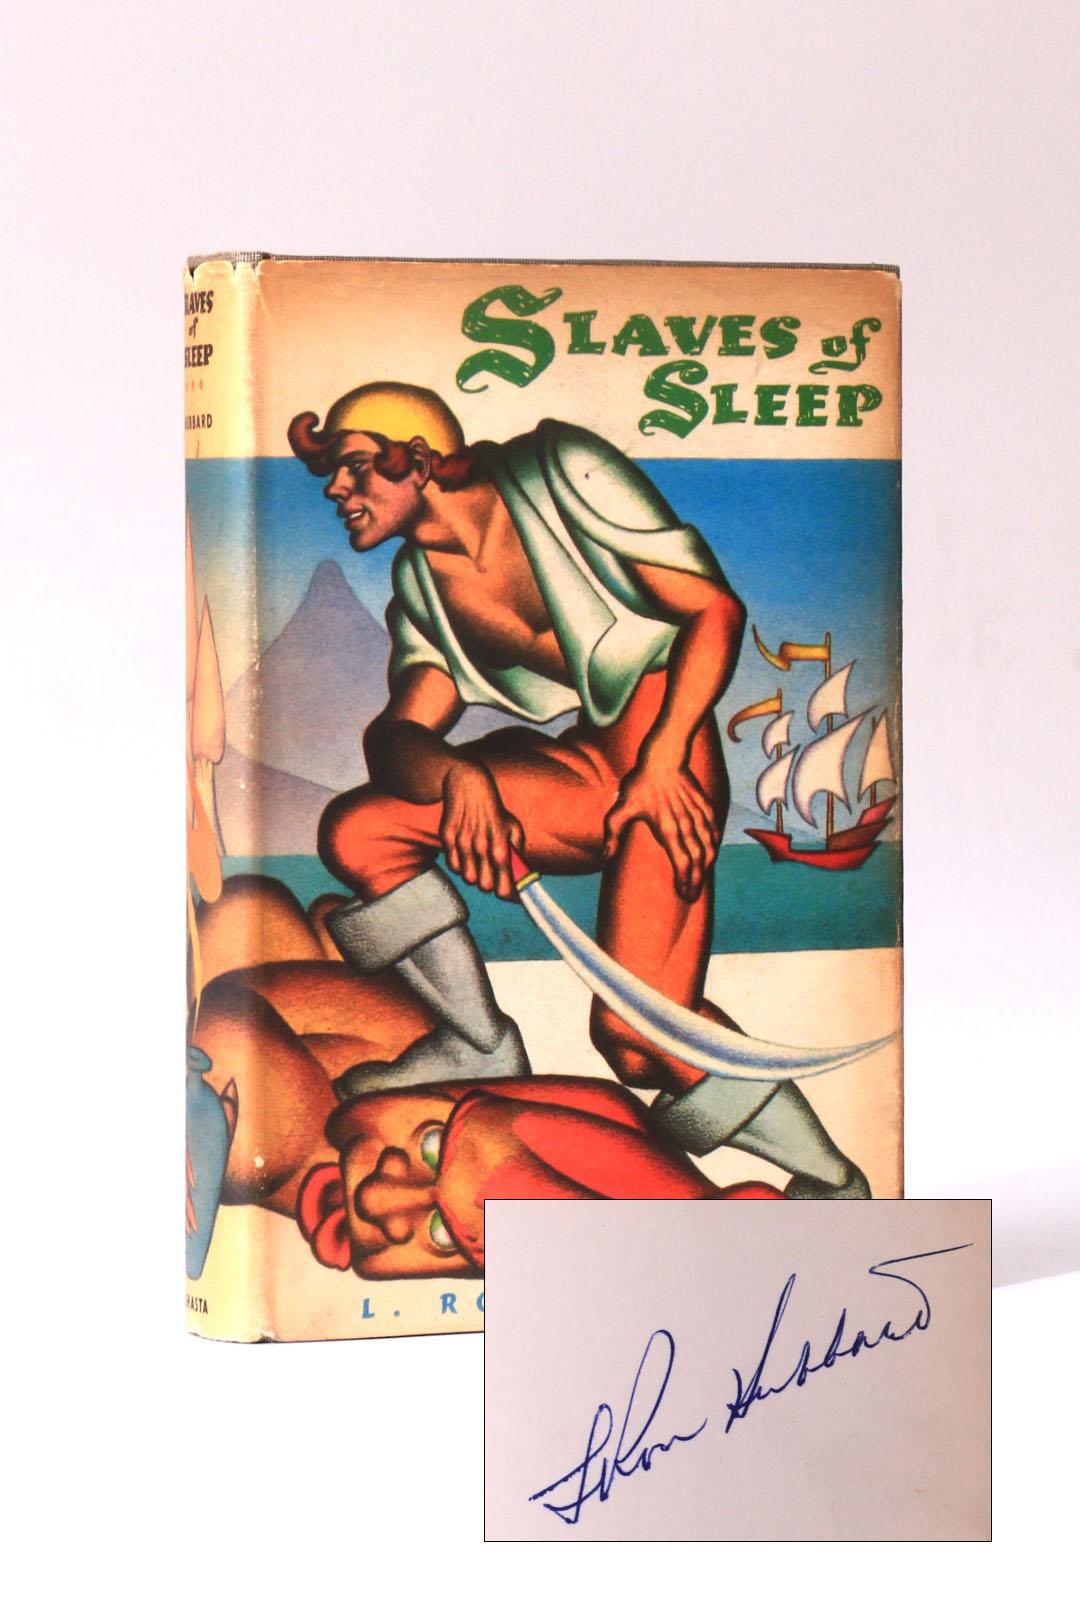 L. Ron Hubbard - Slaves of Sleep - Shasta, 1948, Signed First Edition.